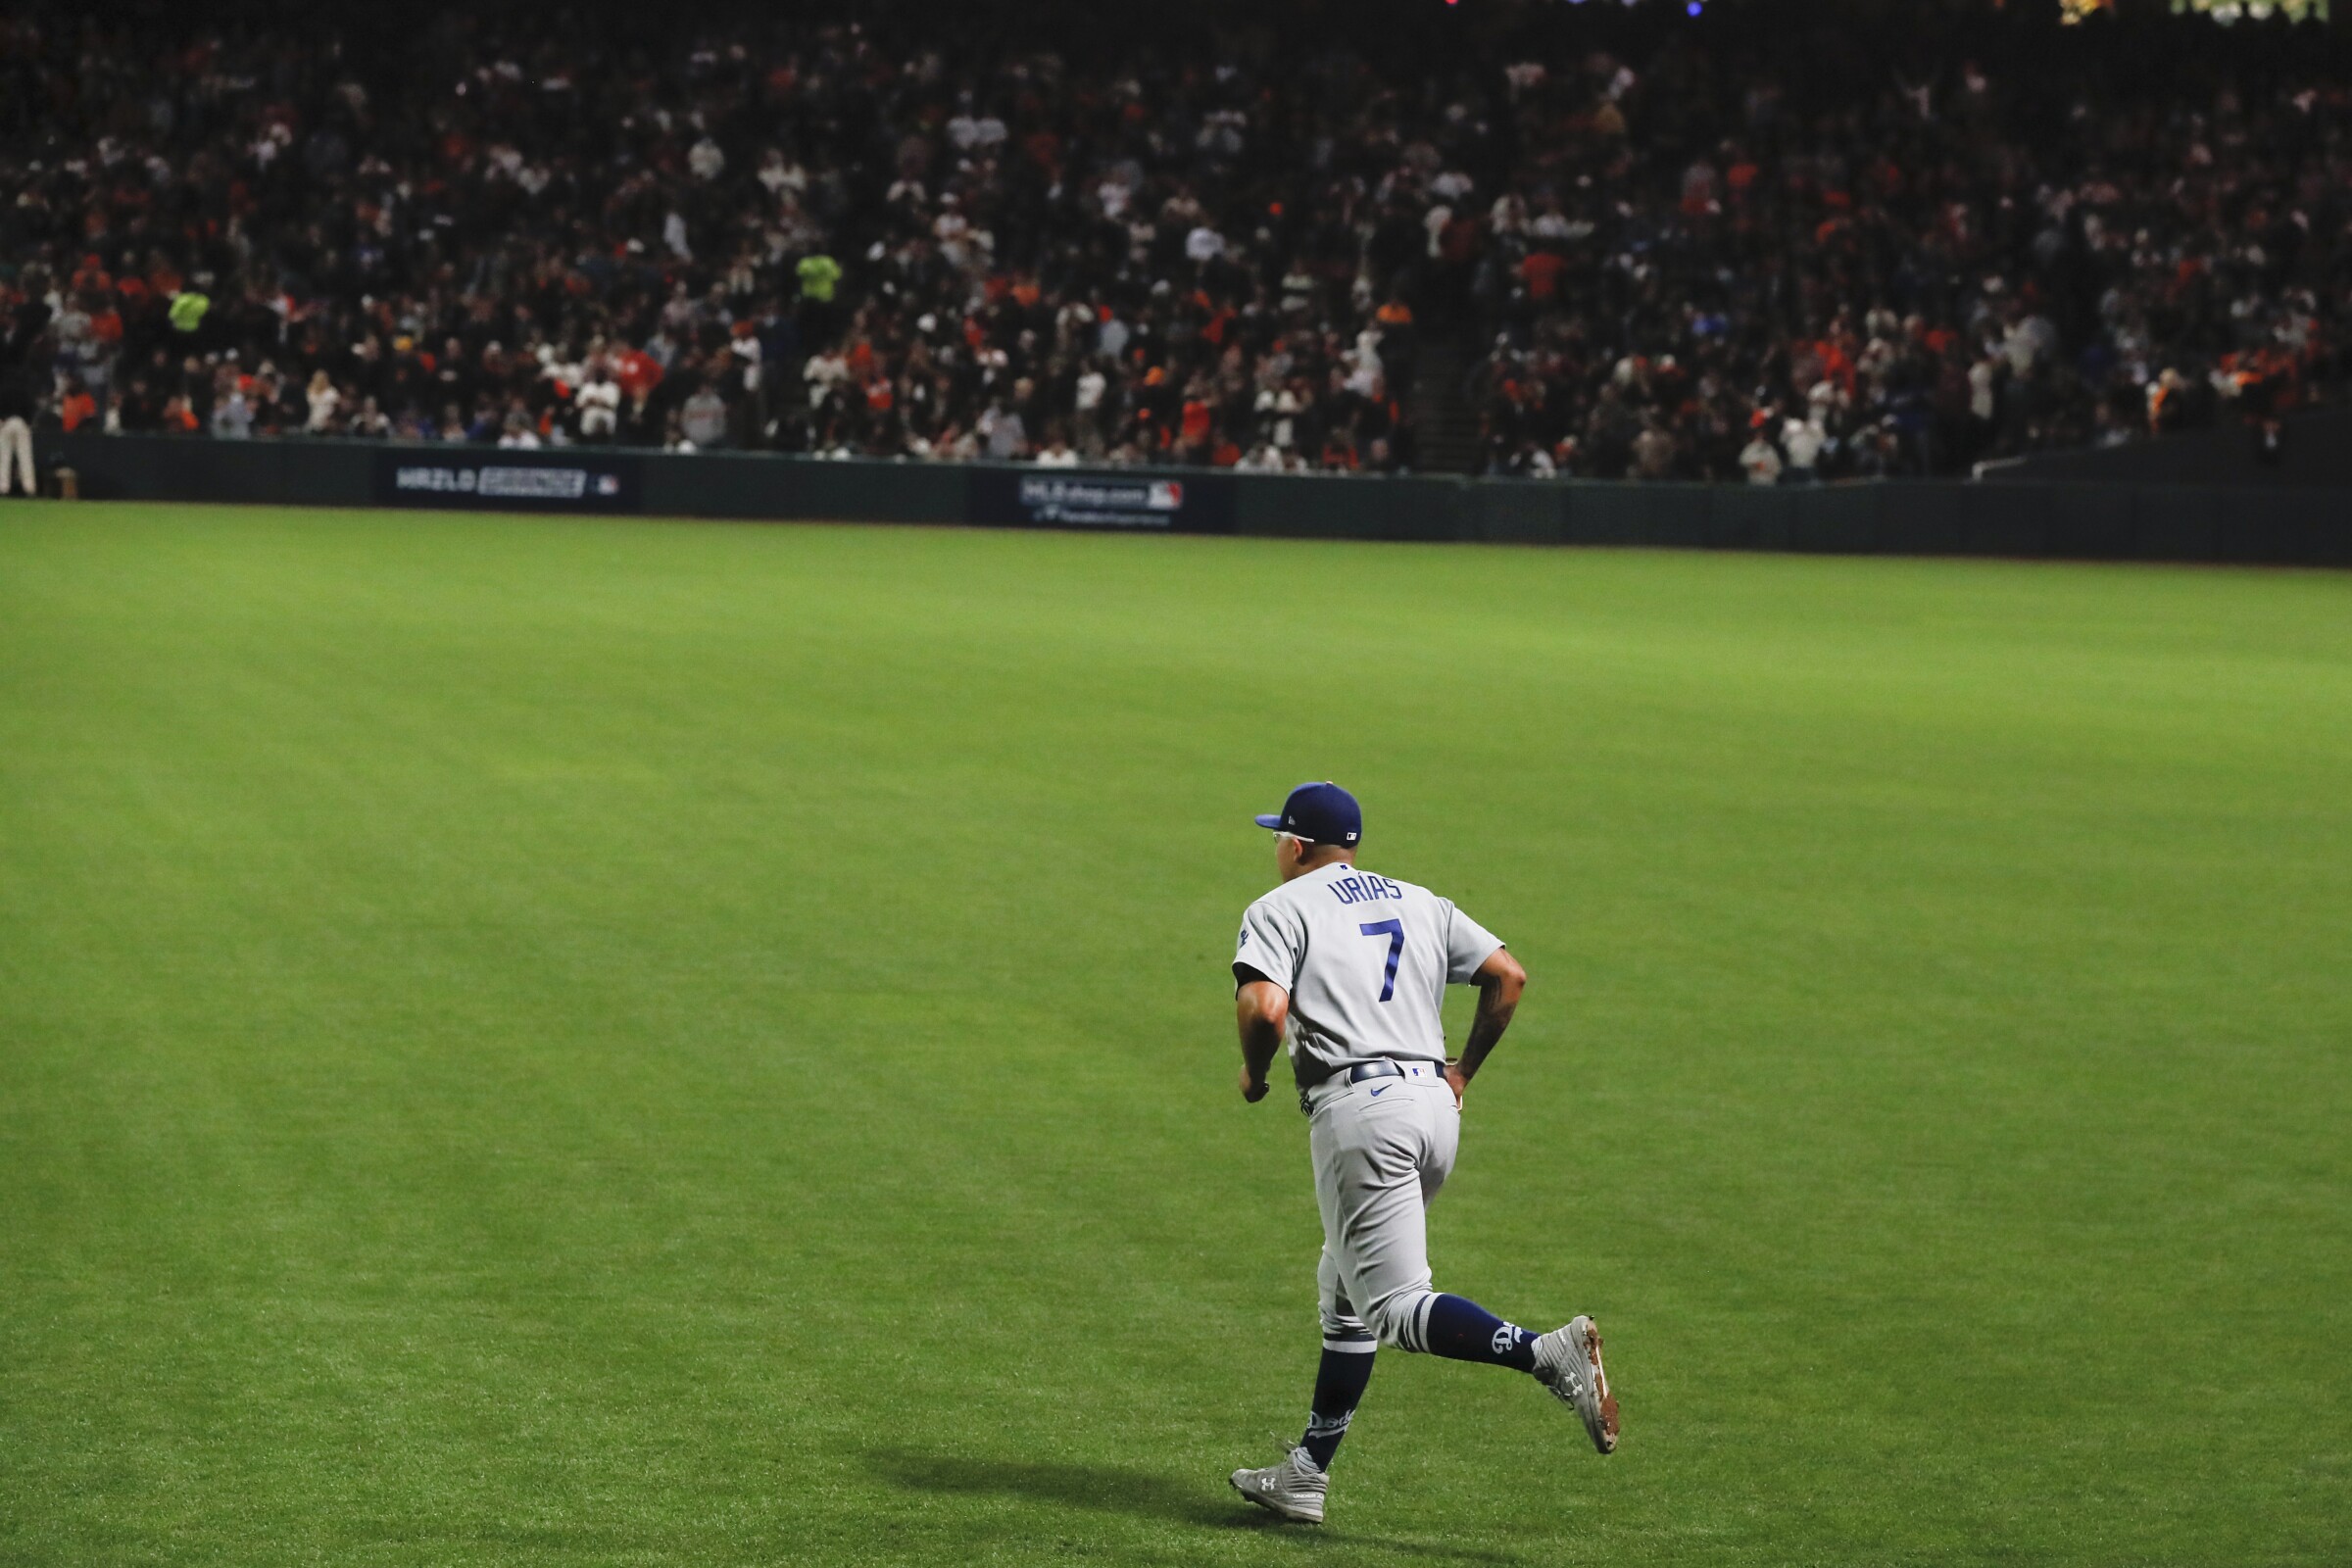 Dodgers pitcher Julio Urias is seen from behind as he runs onto the field from the bullpen